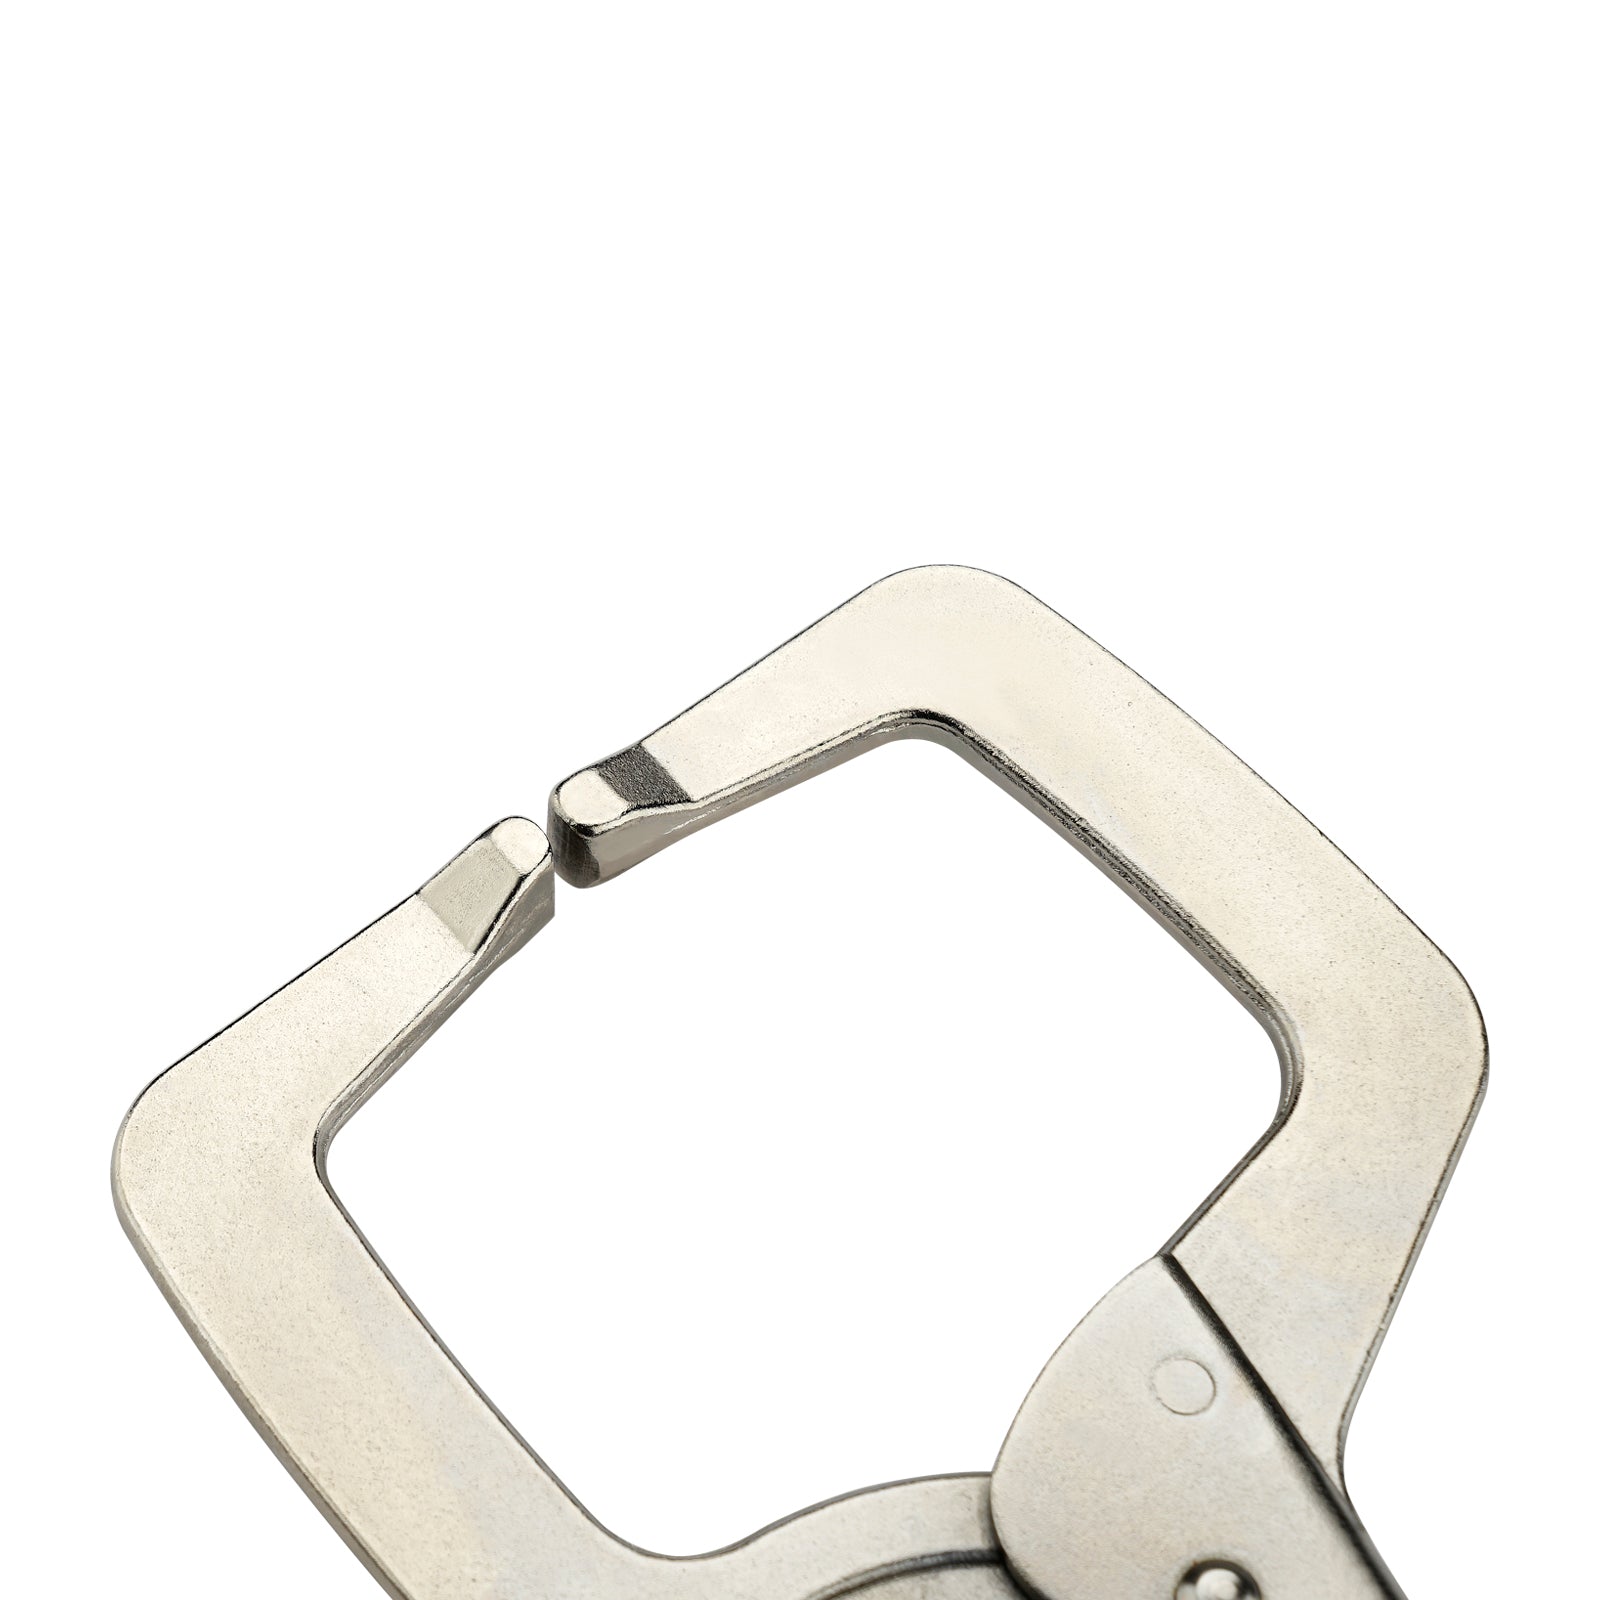 MAXPOWER Locking C-Clamp with Round Tip, 11 Inch, 6 Pack